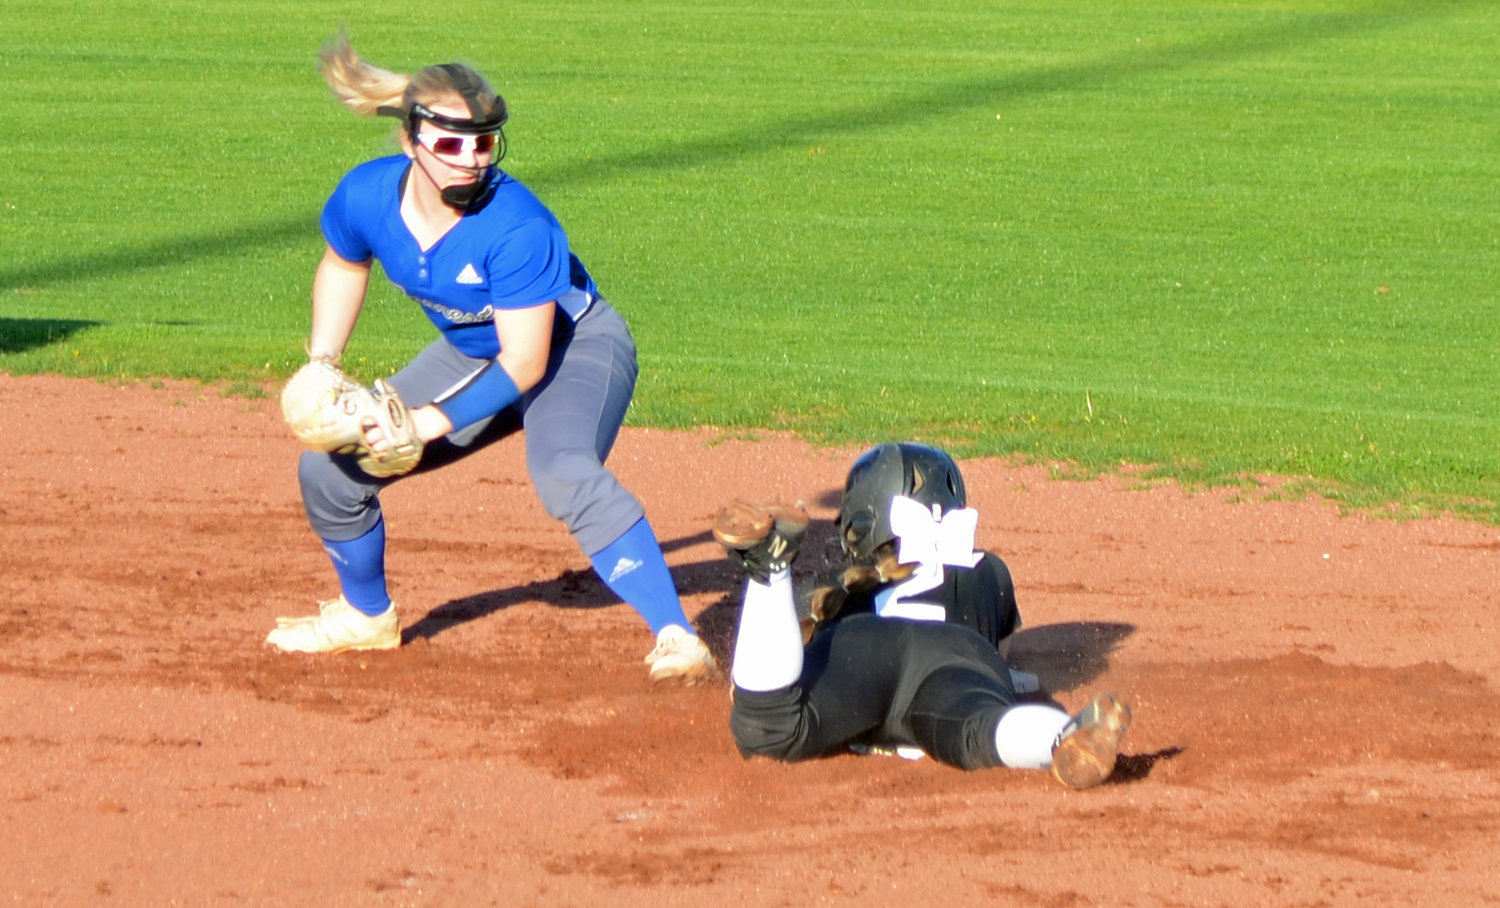 Cornersville’s Emma Ward slides safely in to second base in the first inning.